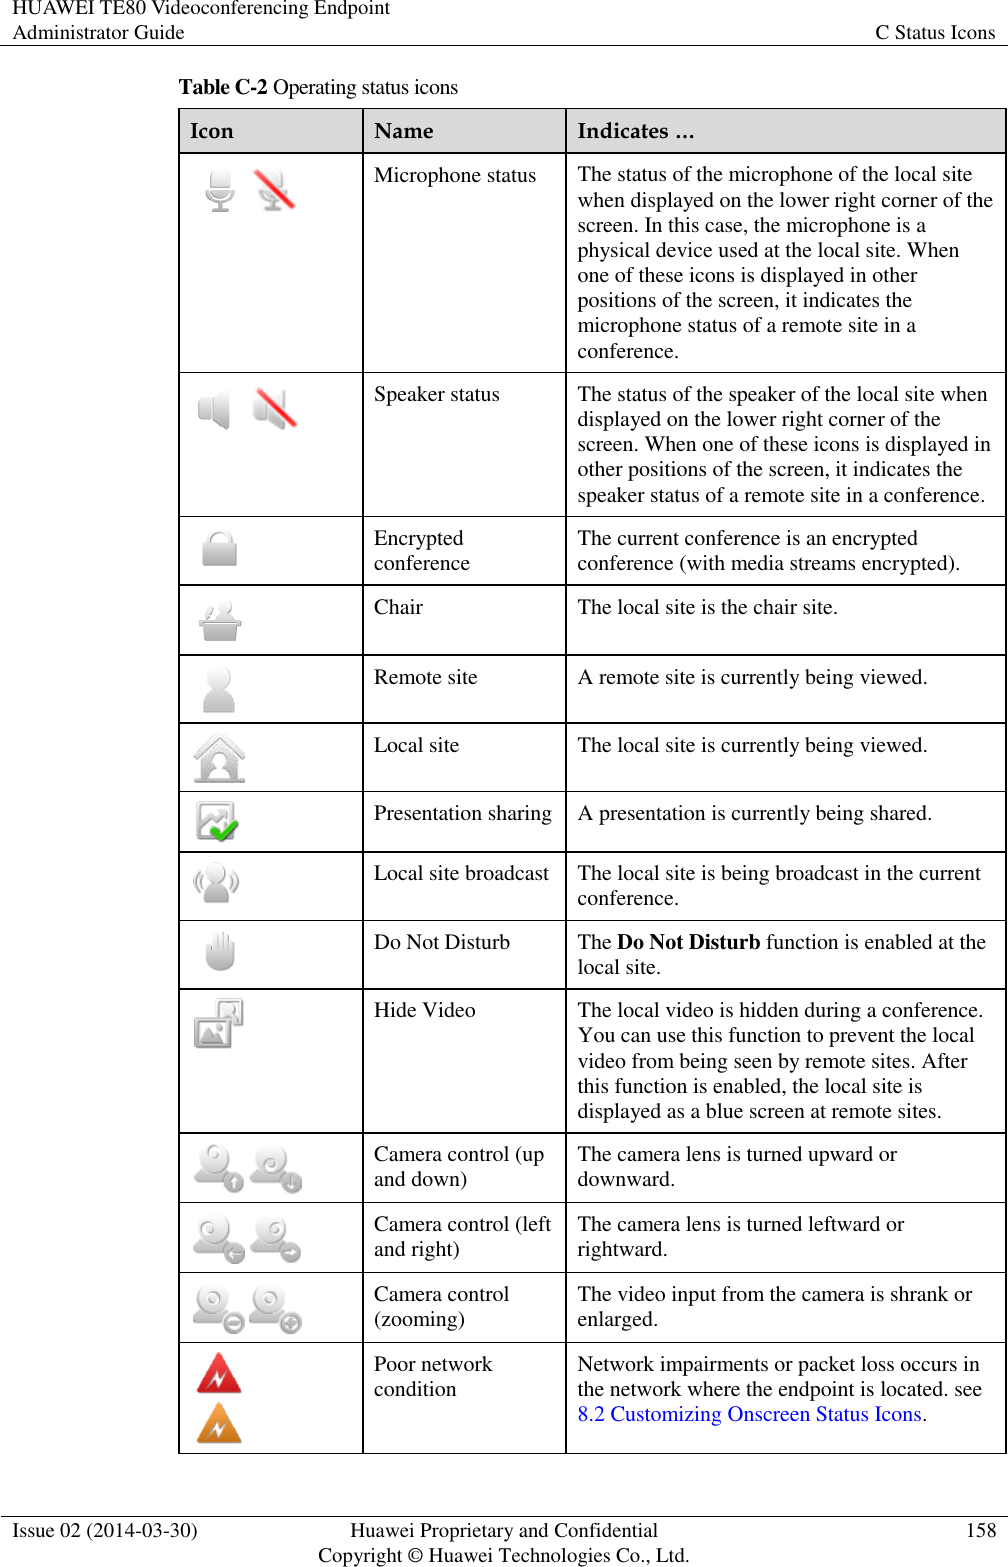 HUAWEI TE80 Videoconferencing Endpoint Administrator Guide C Status Icons  Issue 02 (2014-03-30) Huawei Proprietary and Confidential Copyright © Huawei Technologies Co., Ltd. 158  Table C-2 Operating status icons Icon Name Indicates …  Microphone status The status of the microphone of the local site when displayed on the lower right corner of the screen. In this case, the microphone is a physical device used at the local site. When one of these icons is displayed in other positions of the screen, it indicates the microphone status of a remote site in a conference.  Speaker status The status of the speaker of the local site when displayed on the lower right corner of the screen. When one of these icons is displayed in other positions of the screen, it indicates the speaker status of a remote site in a conference.  Encrypted conference The current conference is an encrypted conference (with media streams encrypted).  Chair The local site is the chair site.  Remote site A remote site is currently being viewed.  Local site The local site is currently being viewed.  Presentation sharing A presentation is currently being shared.  Local site broadcast The local site is being broadcast in the current conference.  Do Not Disturb The Do Not Disturb function is enabled at the local site.  Hide Video The local video is hidden during a conference. You can use this function to prevent the local video from being seen by remote sites. After this function is enabled, the local site is displayed as a blue screen at remote sites.  Camera control (up and down) The camera lens is turned upward or downward.  Camera control (left and right) The camera lens is turned leftward or rightward.  Camera control (zooming) The video input from the camera is shrank or enlarged.   Poor network condition Network impairments or packet loss occurs in the network where the endpoint is located. see 8.2 Customizing Onscreen Status Icons. 